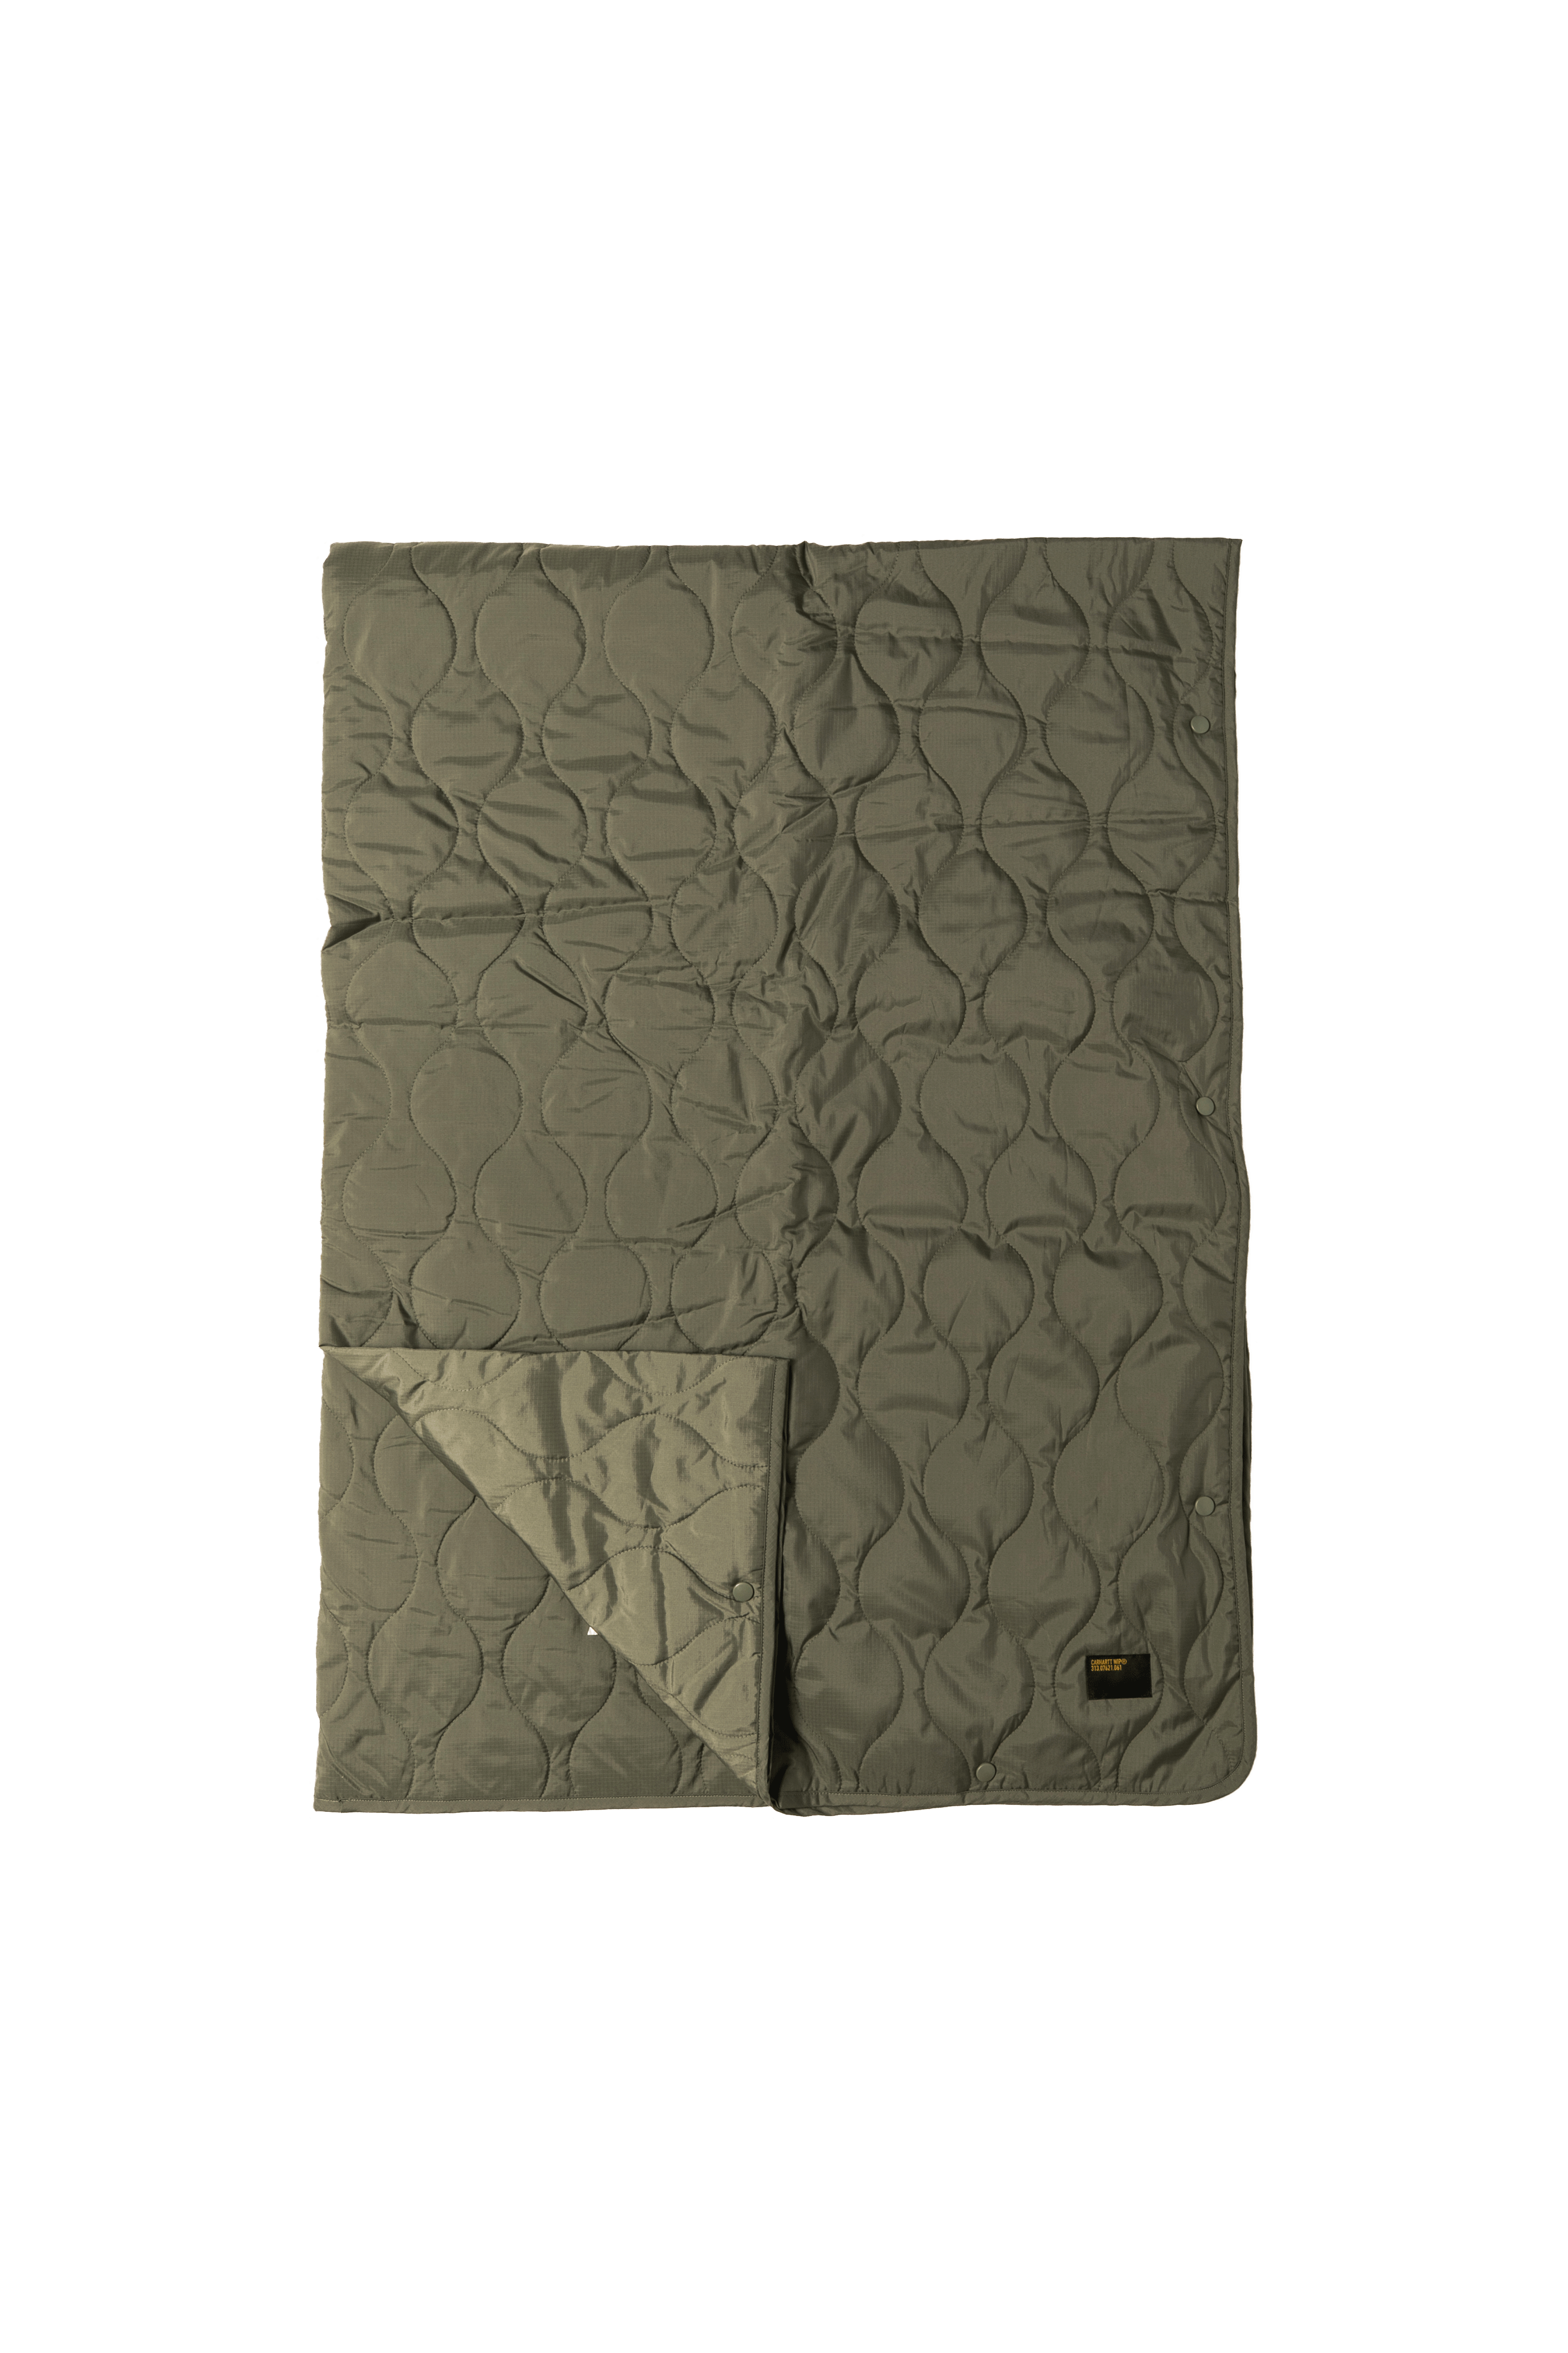 Tour Quilted Blanket